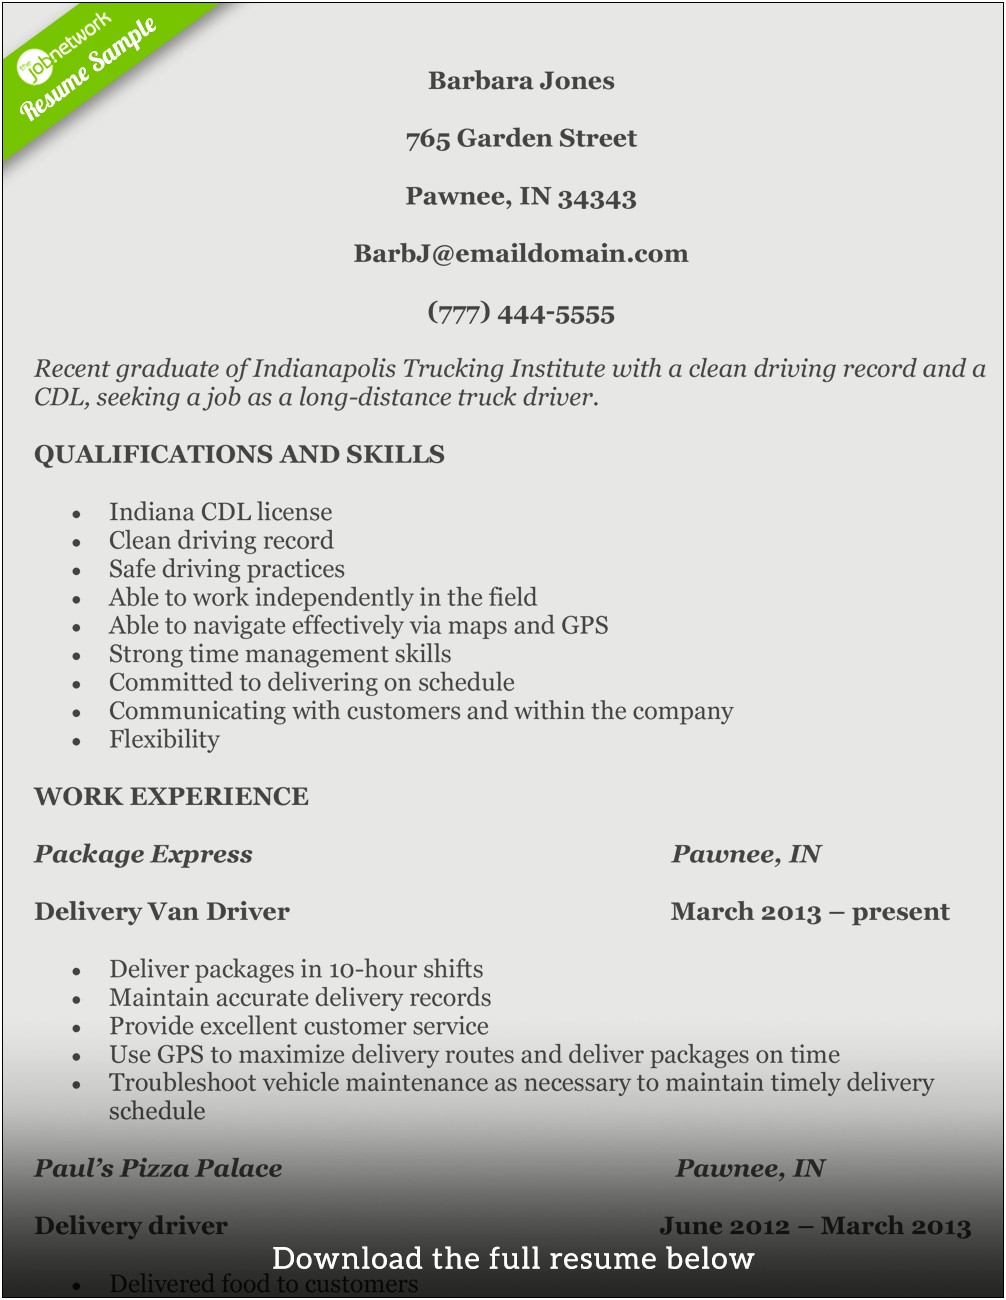 Truck Driver Objective Statement For Resume